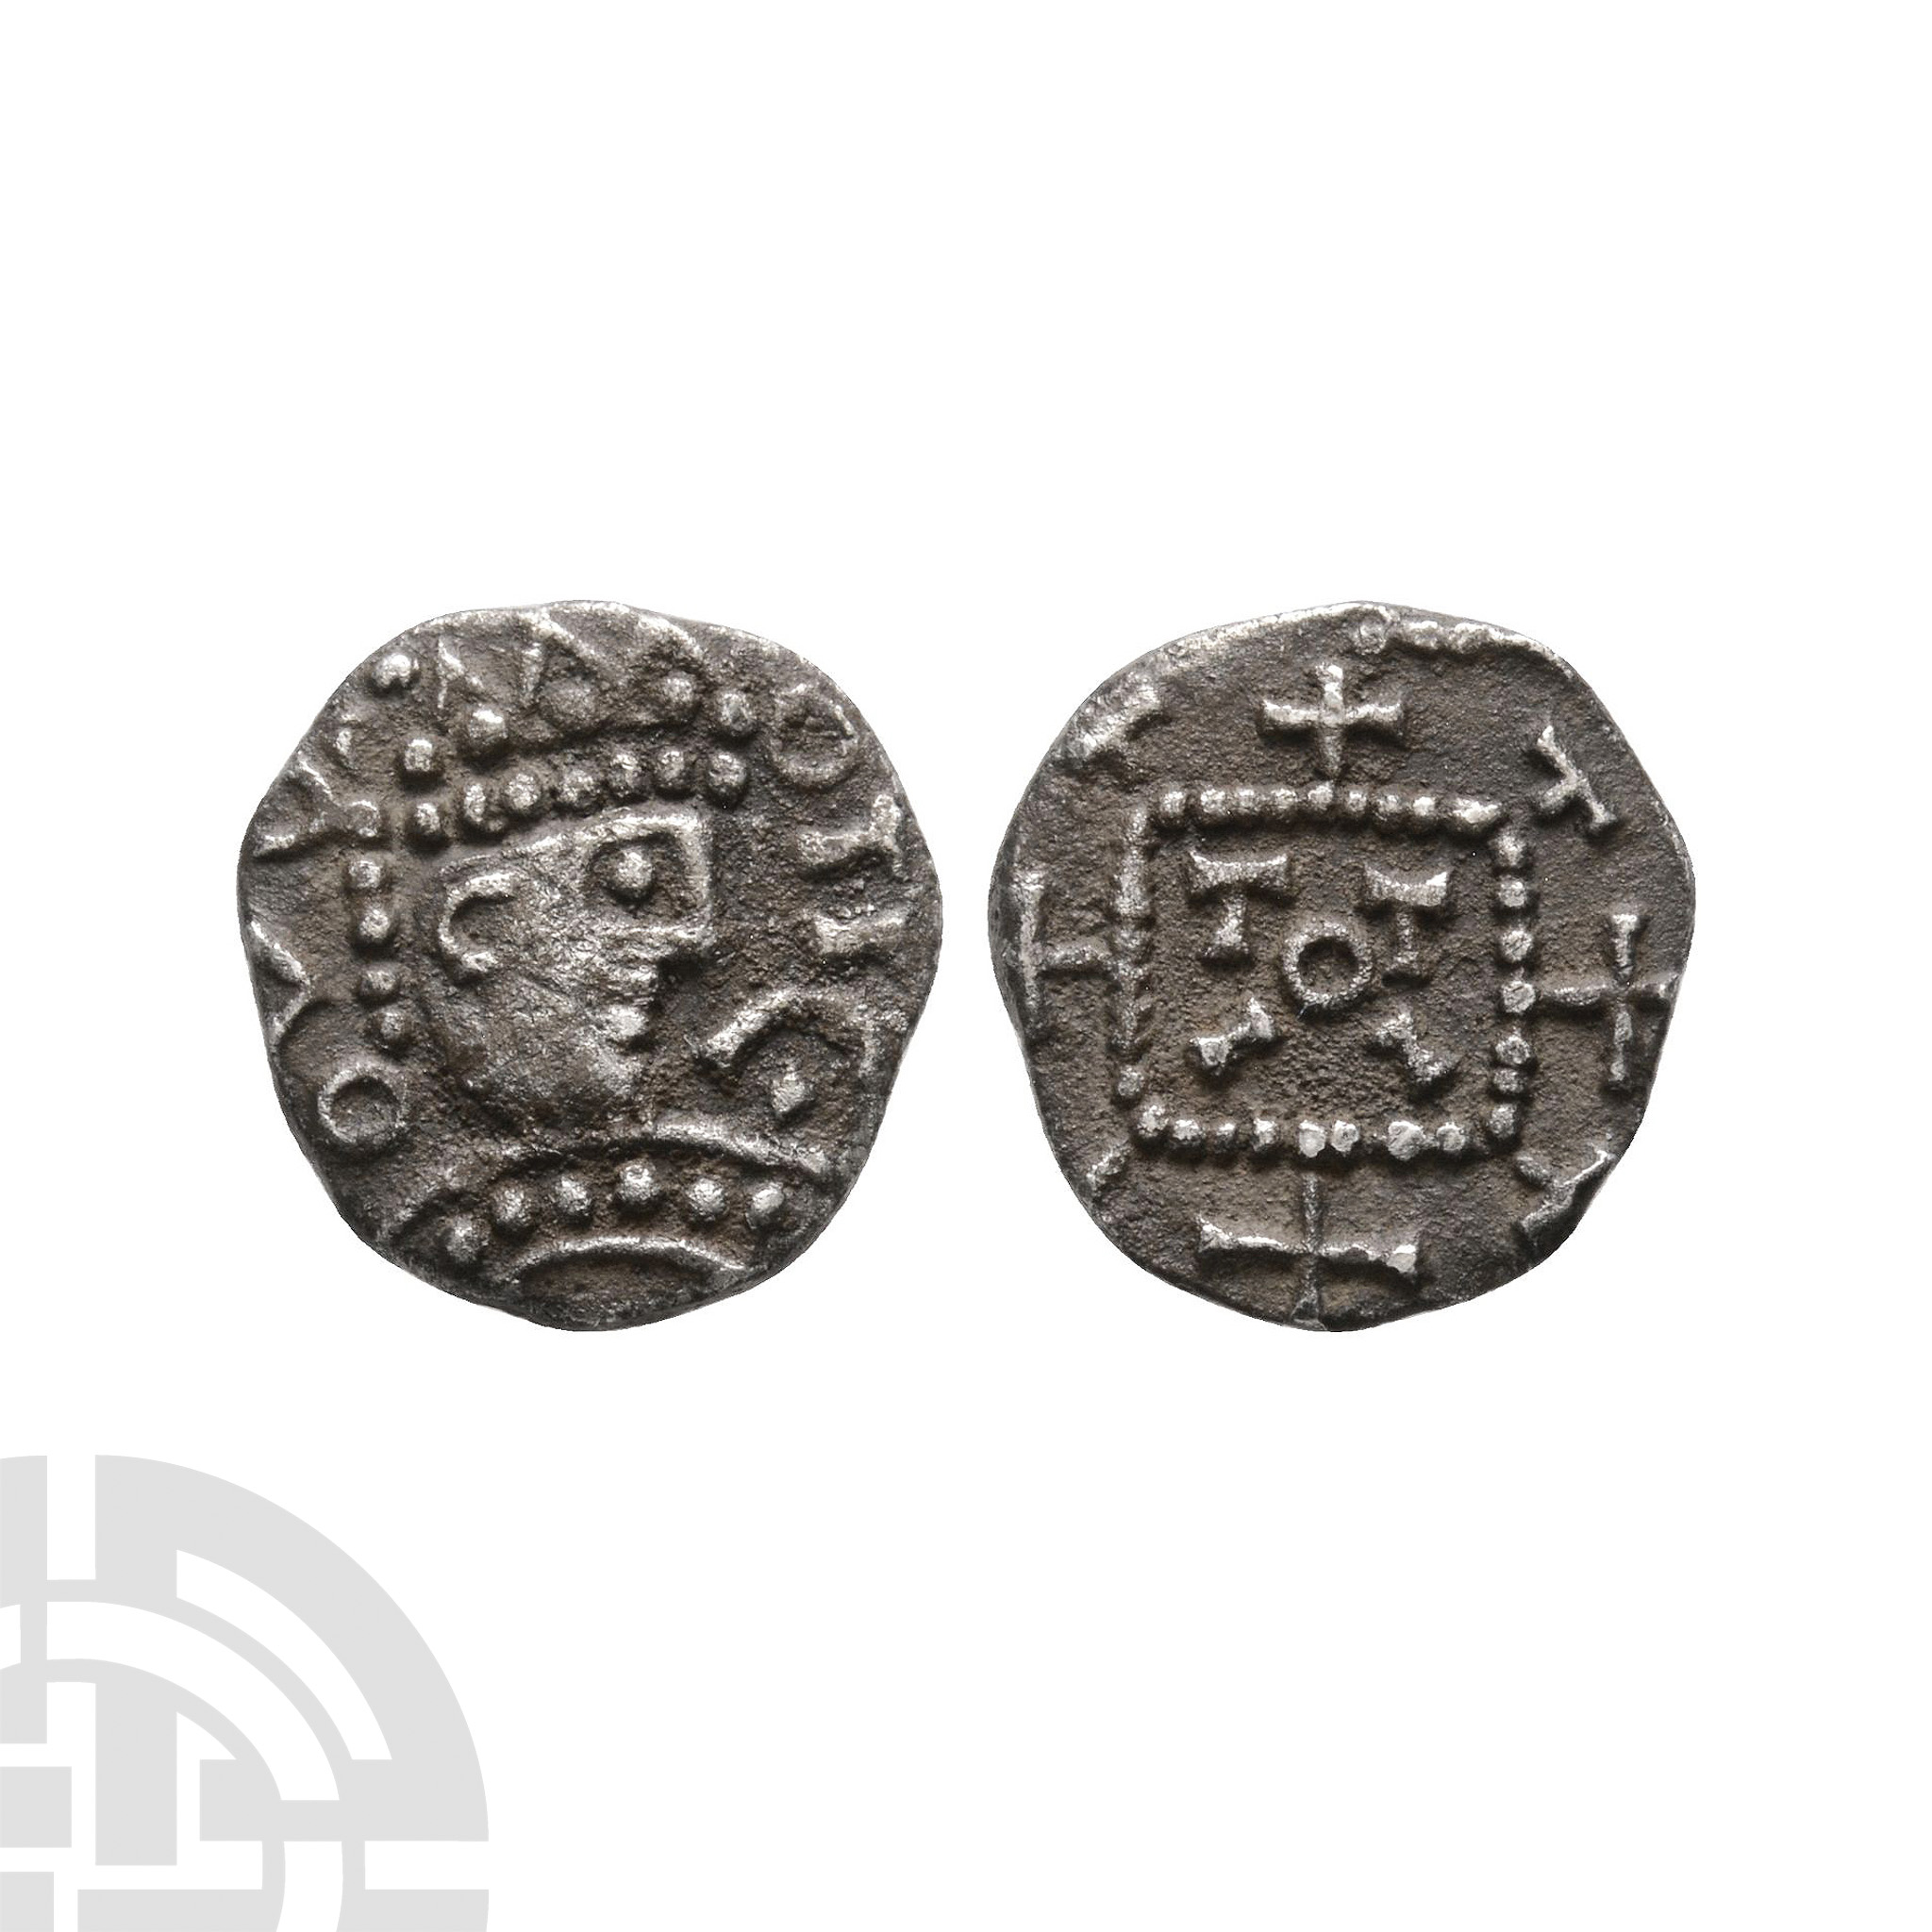 Anglo-Saxon Coins - Primary Phase - Series A, 2A - AR TIC Sceatta